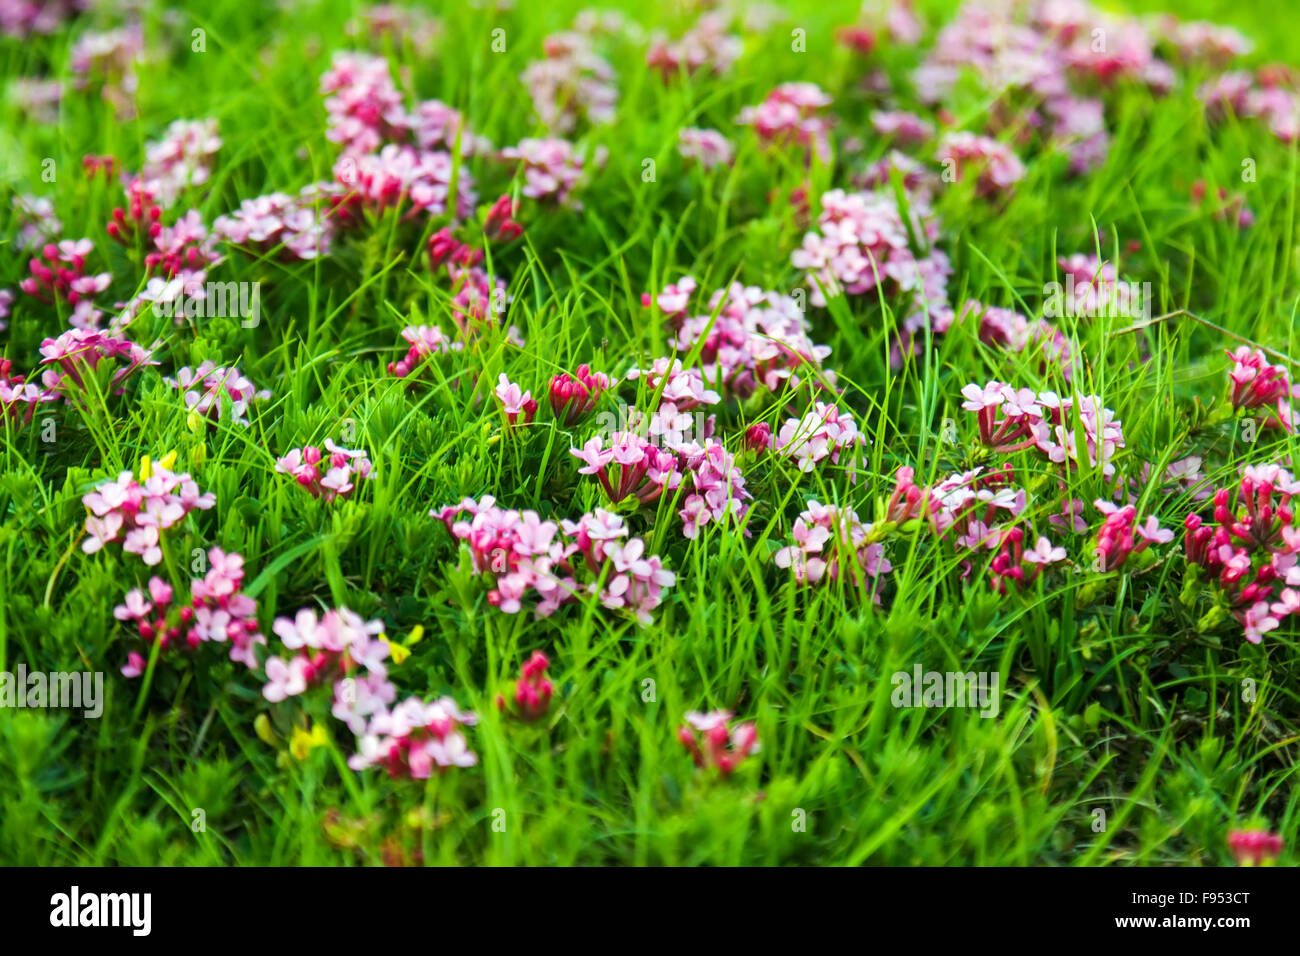 Wild plant of pink flowers at highland meadow Stock Photo